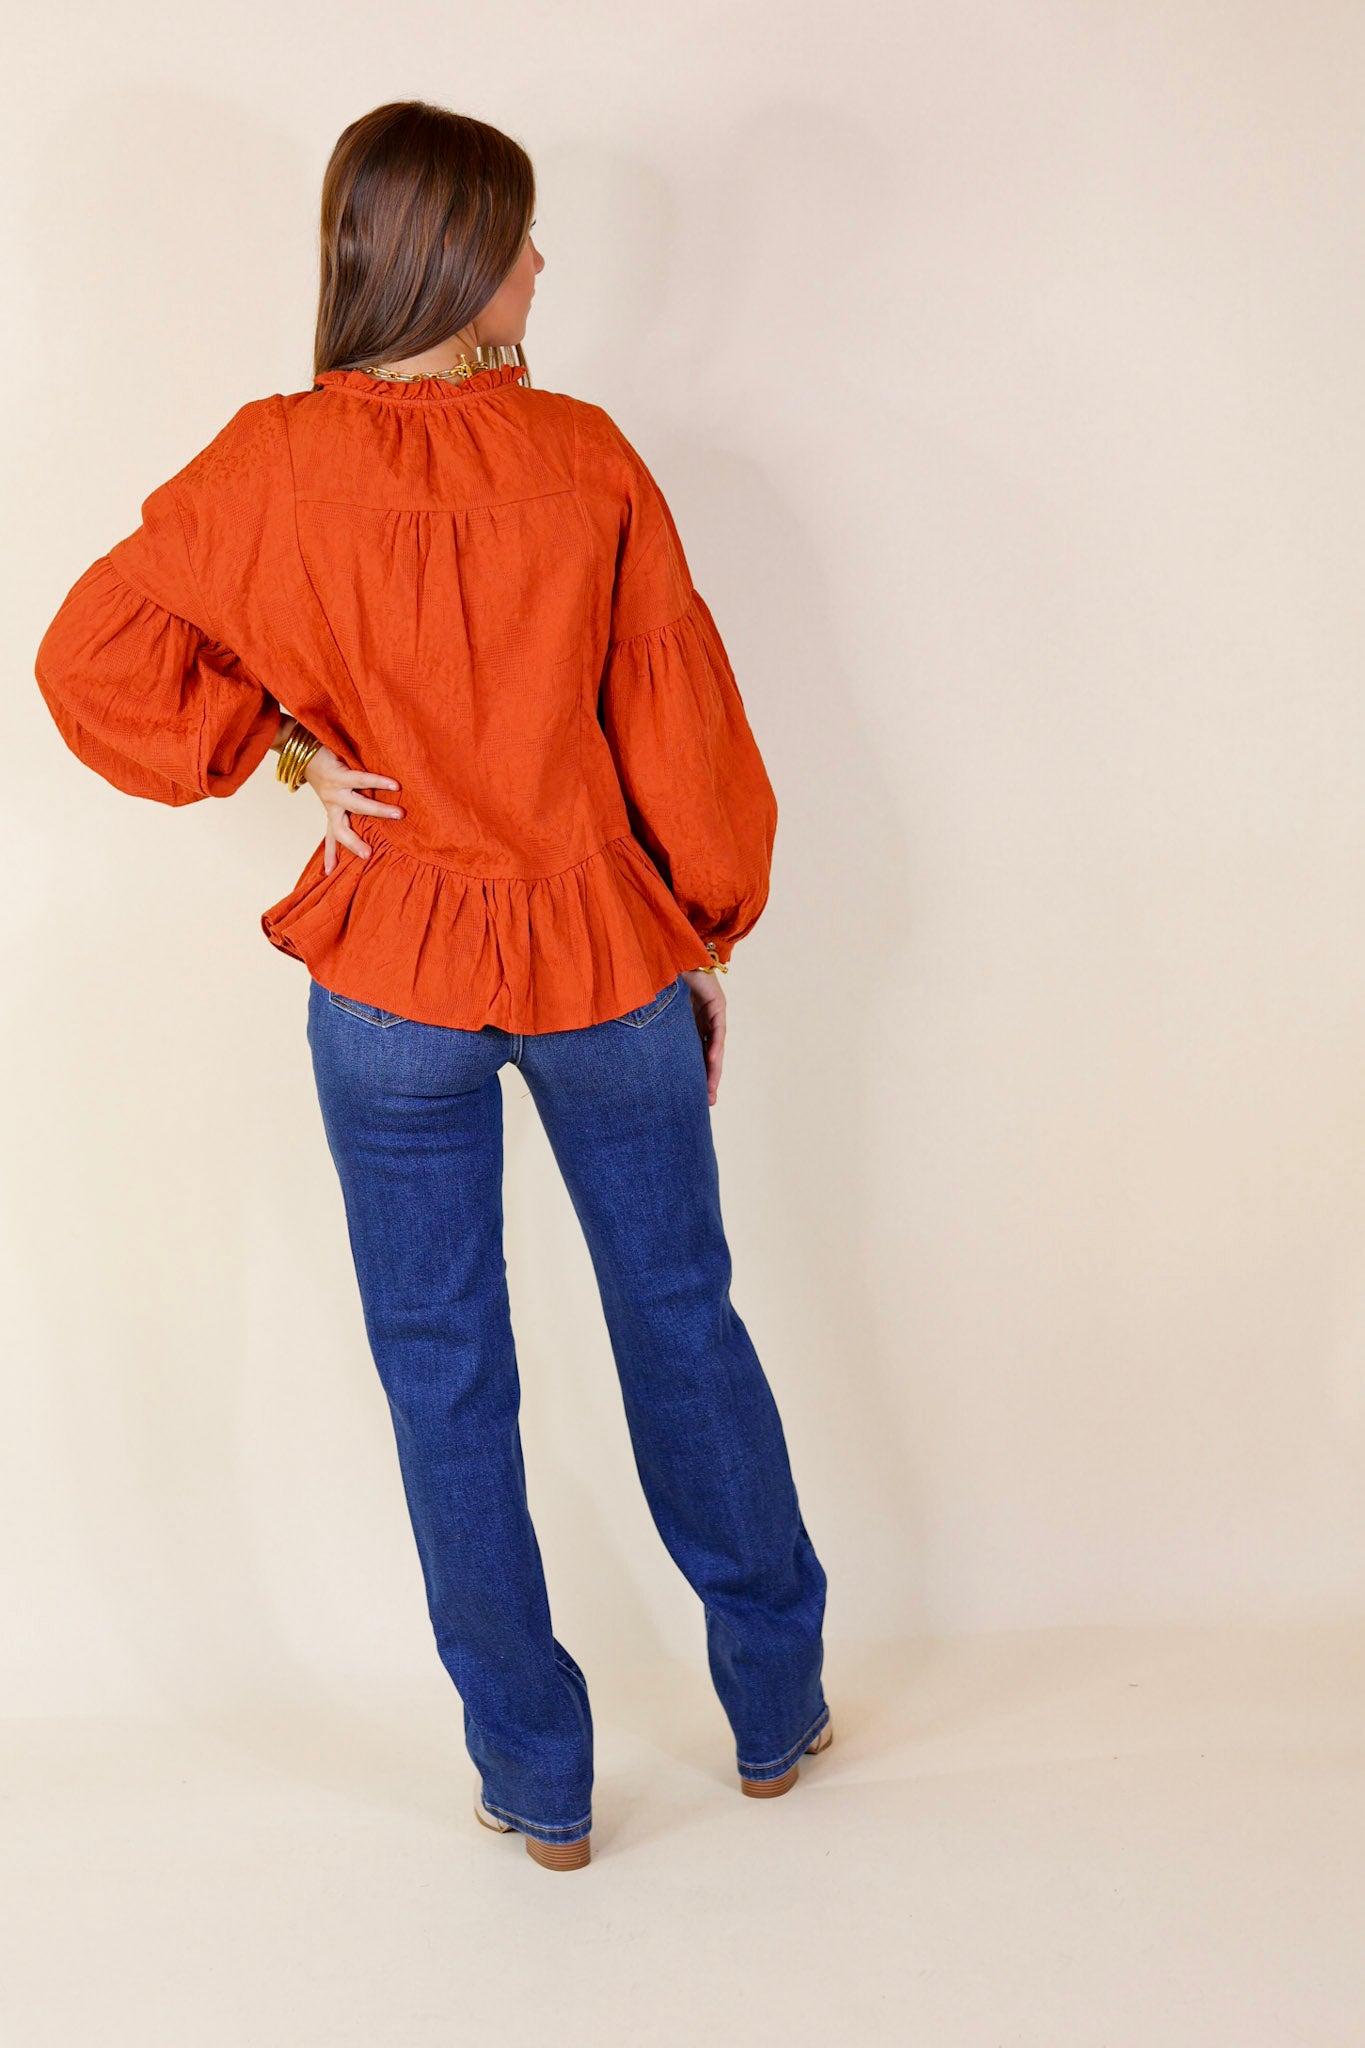 Free Fallin' Textured Long Sleeve Peplum Top with Keyhole Front in Orange - Giddy Up Glamour Boutique